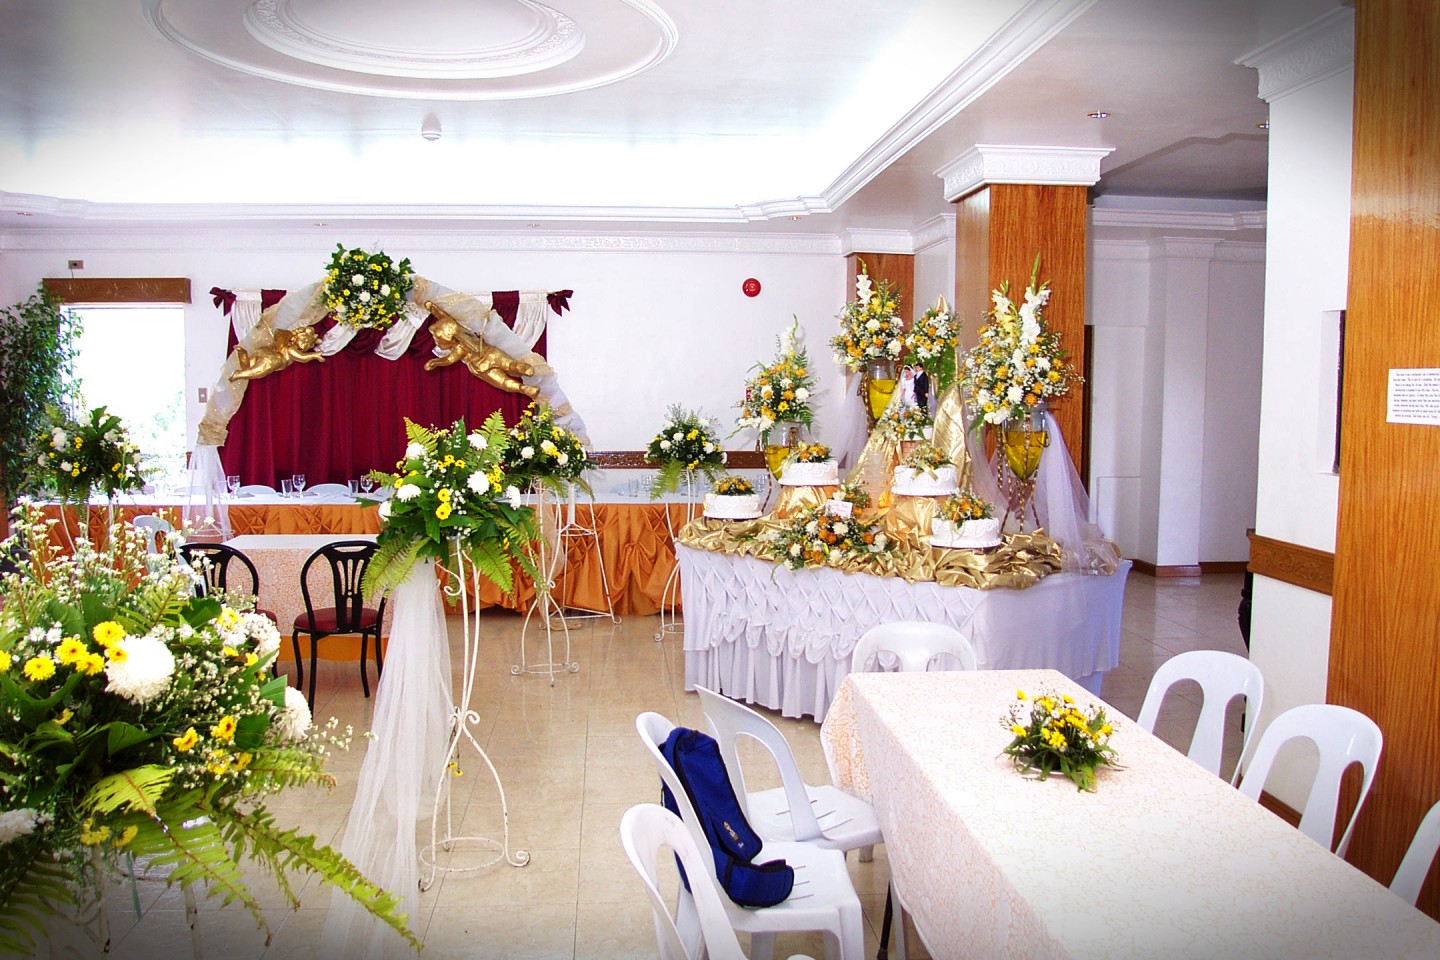 Ma Lina Catering Function Room